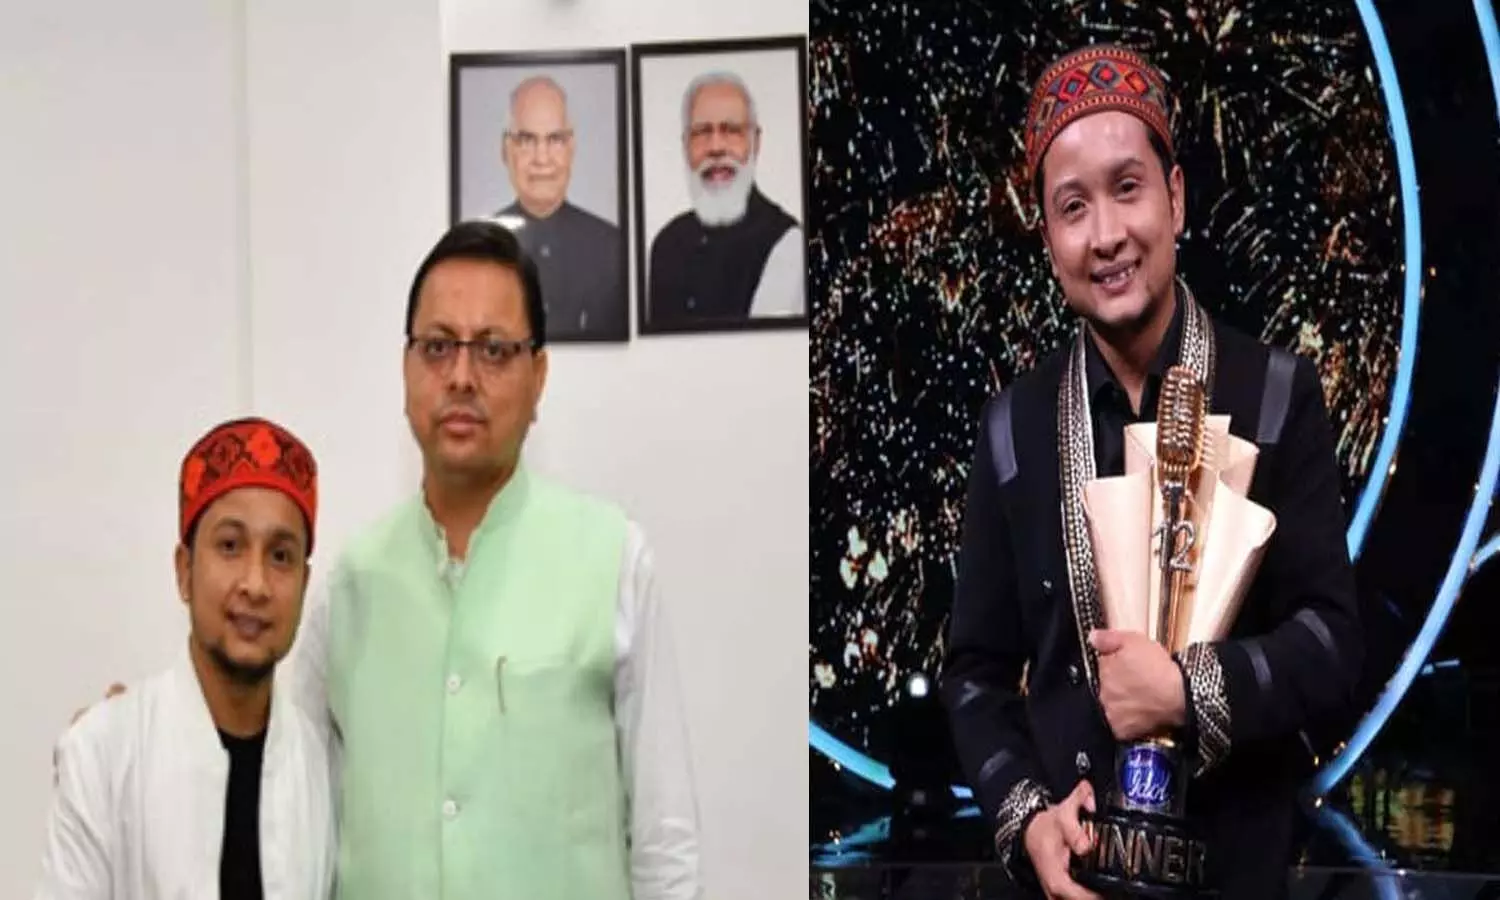 Indian Idol winner Pavandeep Rajan was on Wednesday appointed as the brand ambassador of Uttarakhand for arts, tourism and culture.